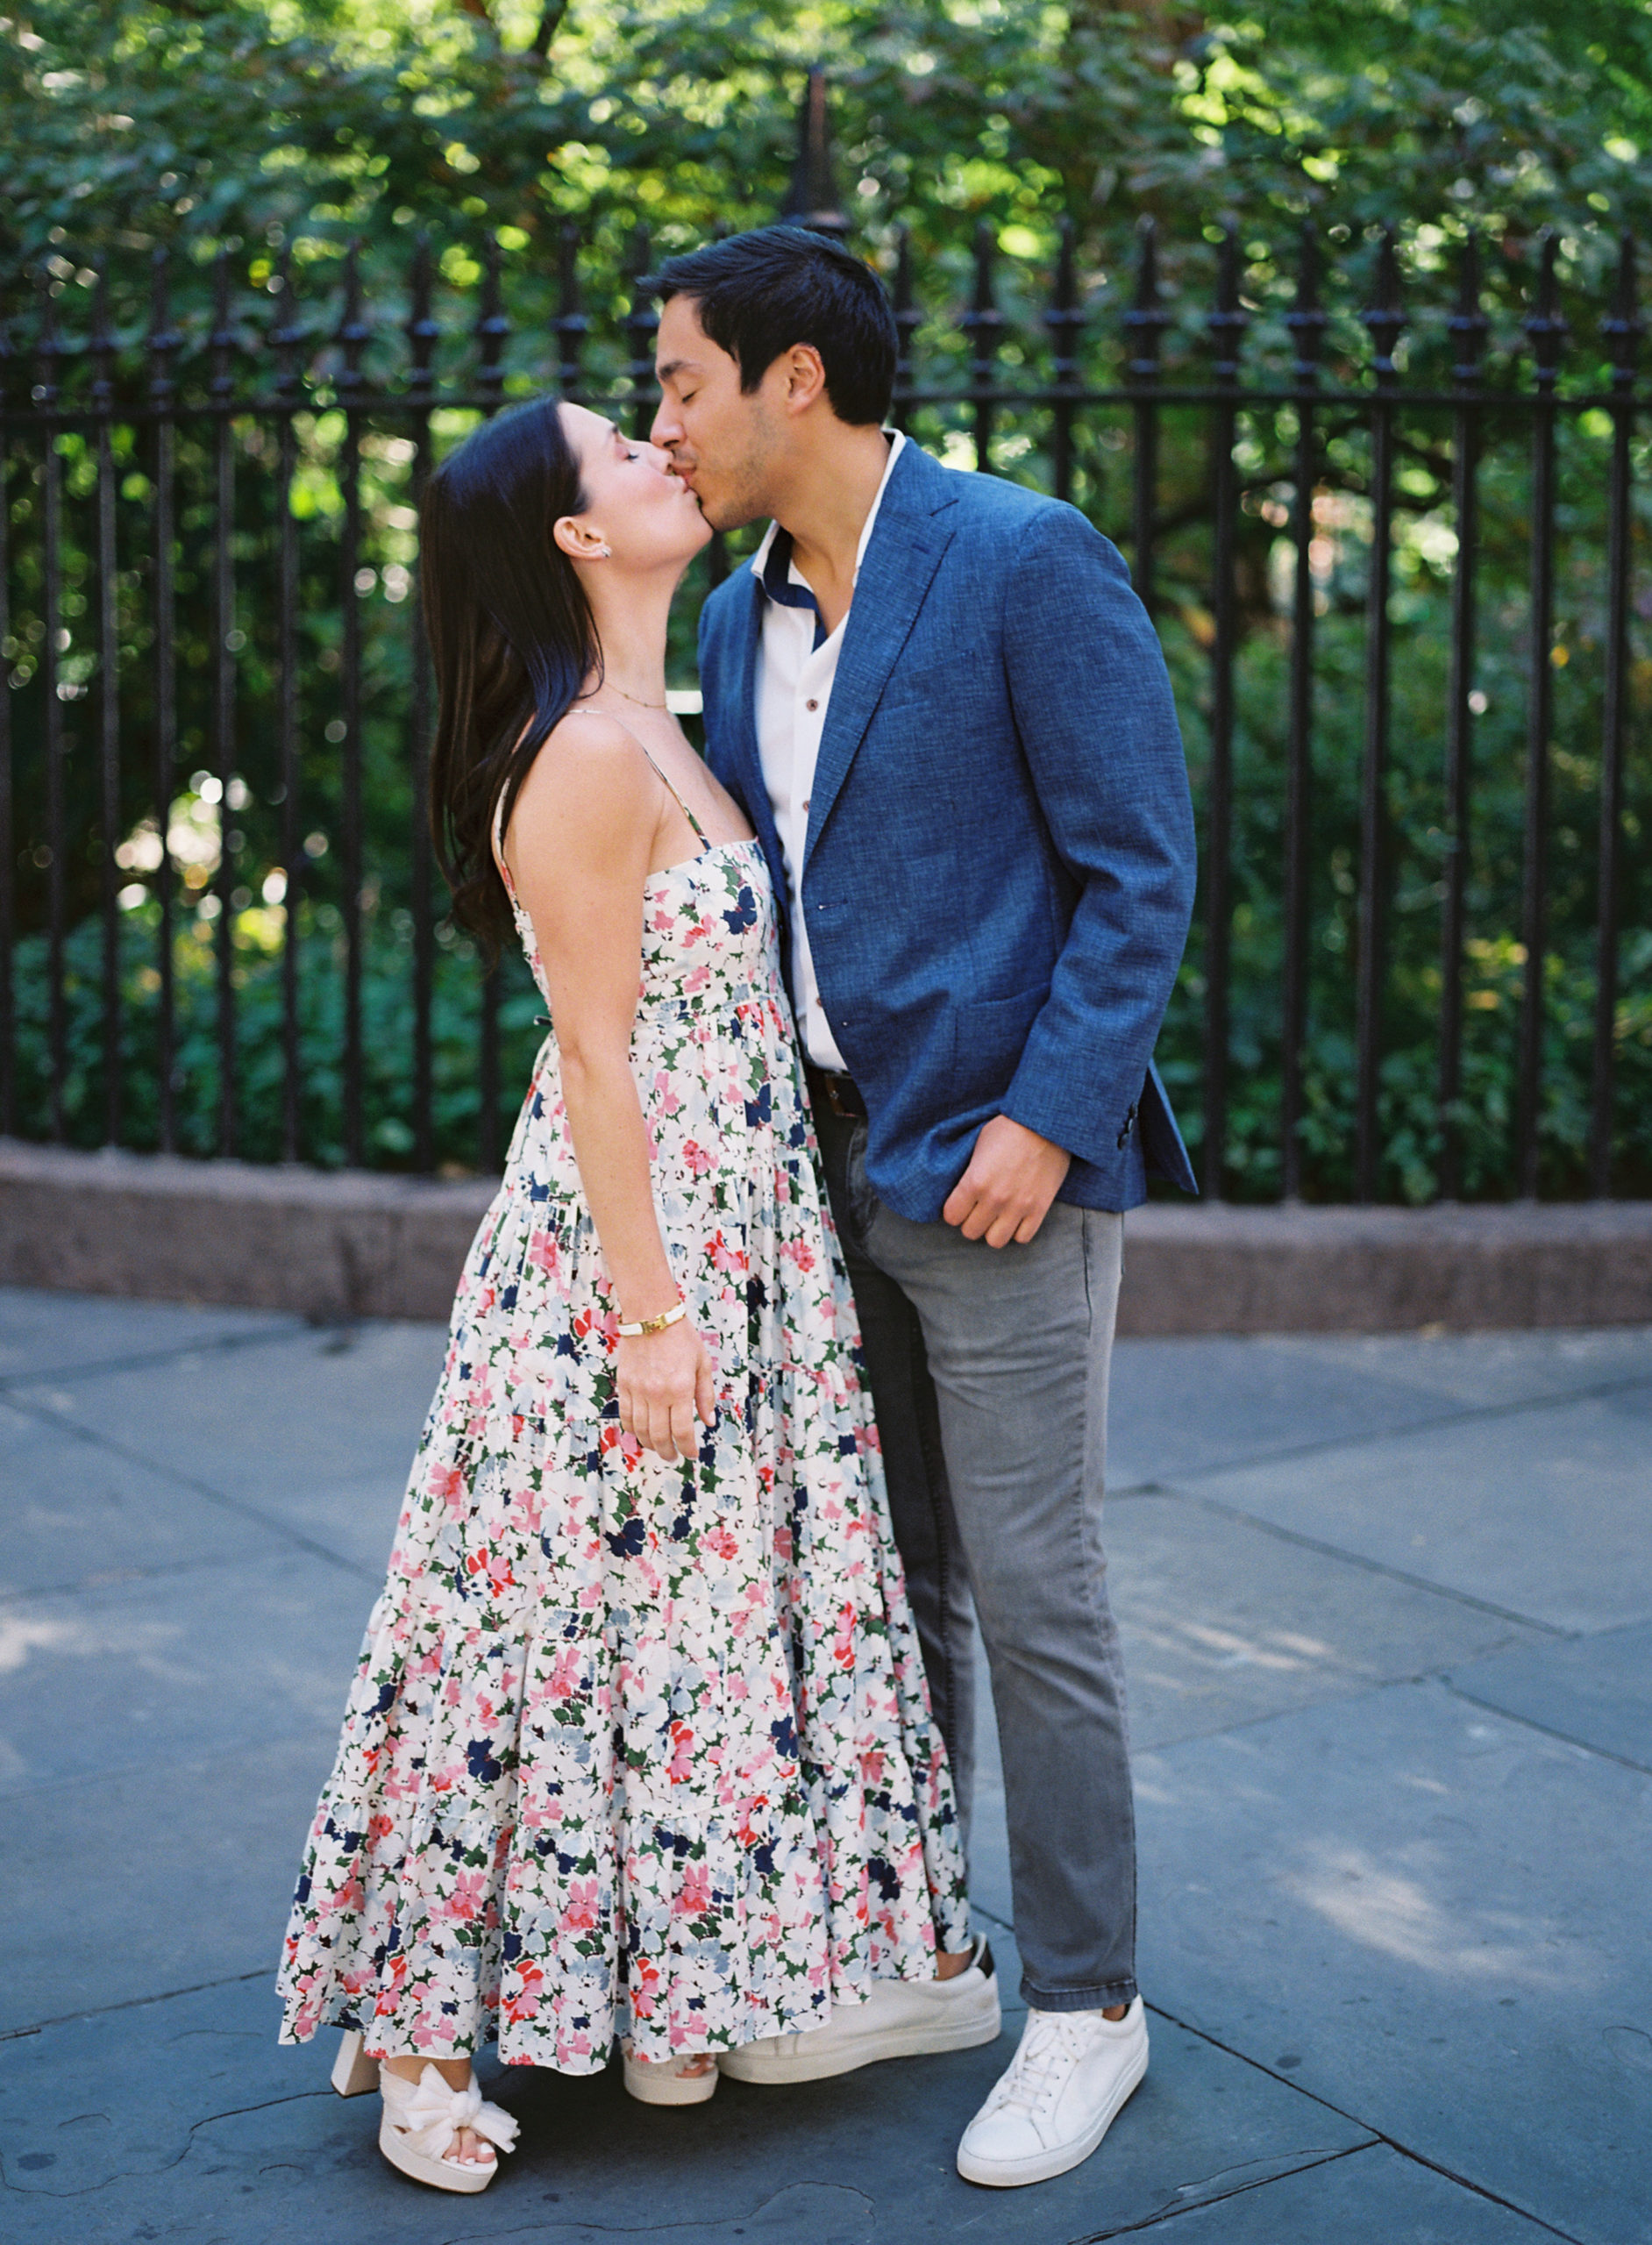 Gramercy Park Engagement Session, New York Engagement Photographer, Anna Gianfrate Photography